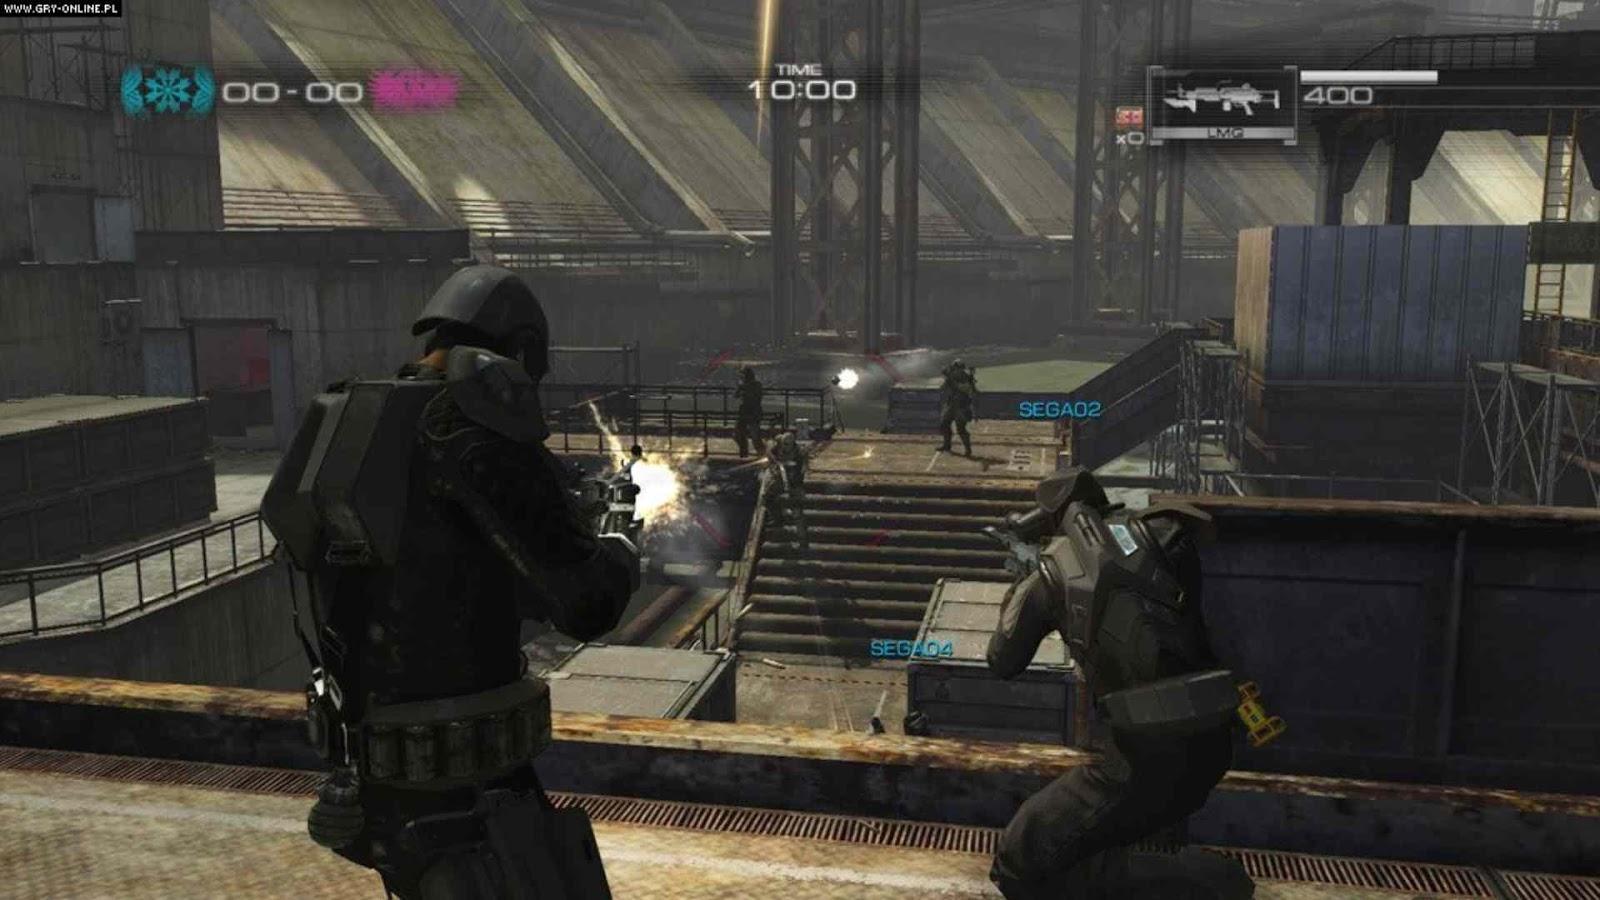 How to Download and Play Sniper 3D: Fun Free Online FPS Shooting Game on PC- Game Guides-LDPlayer